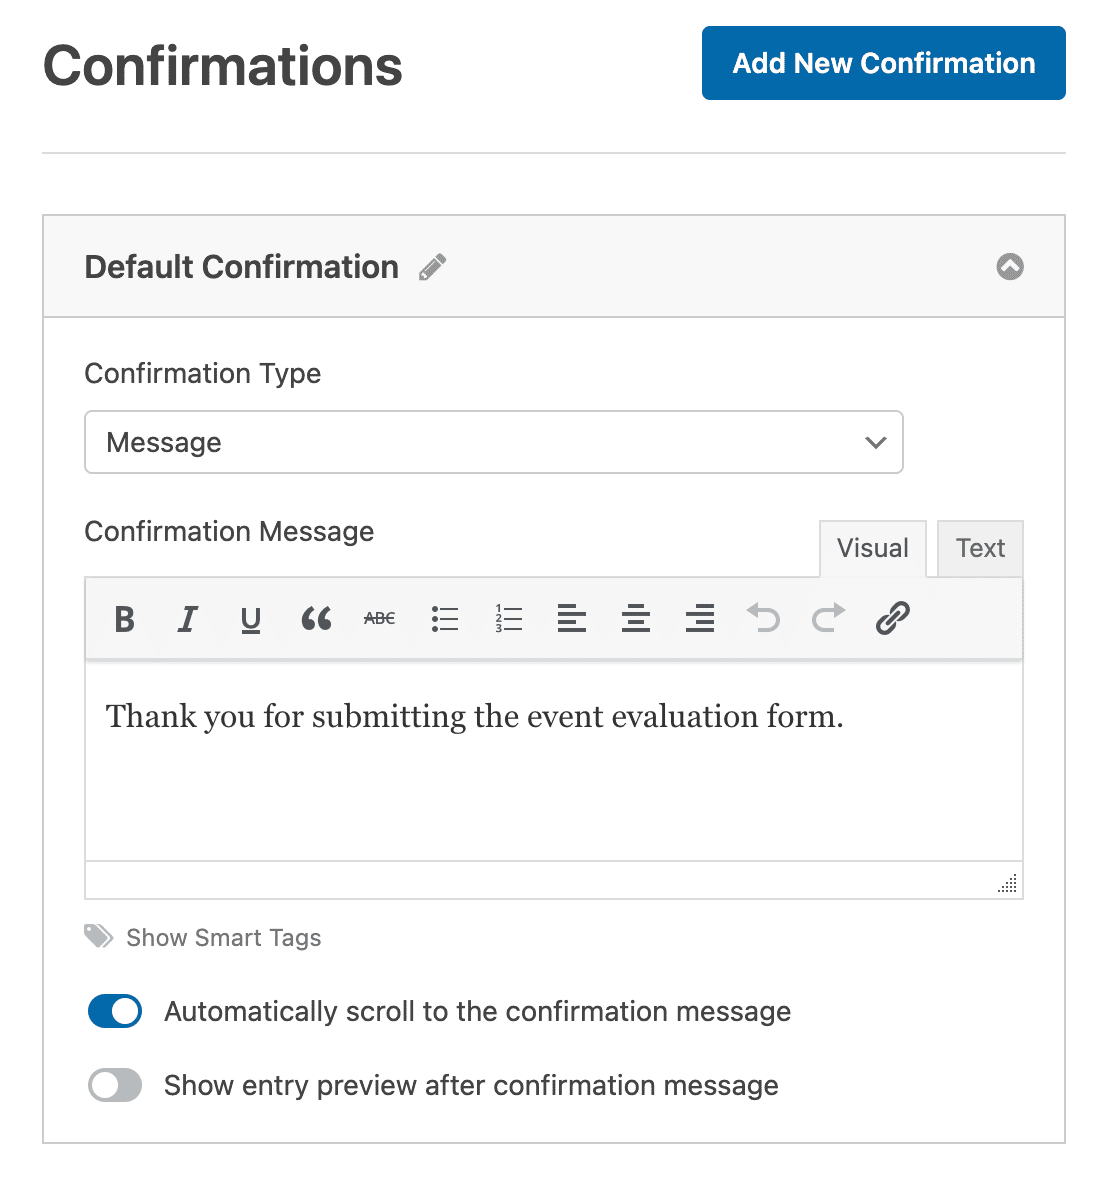 Customizing the confirmation message for an event feedback form